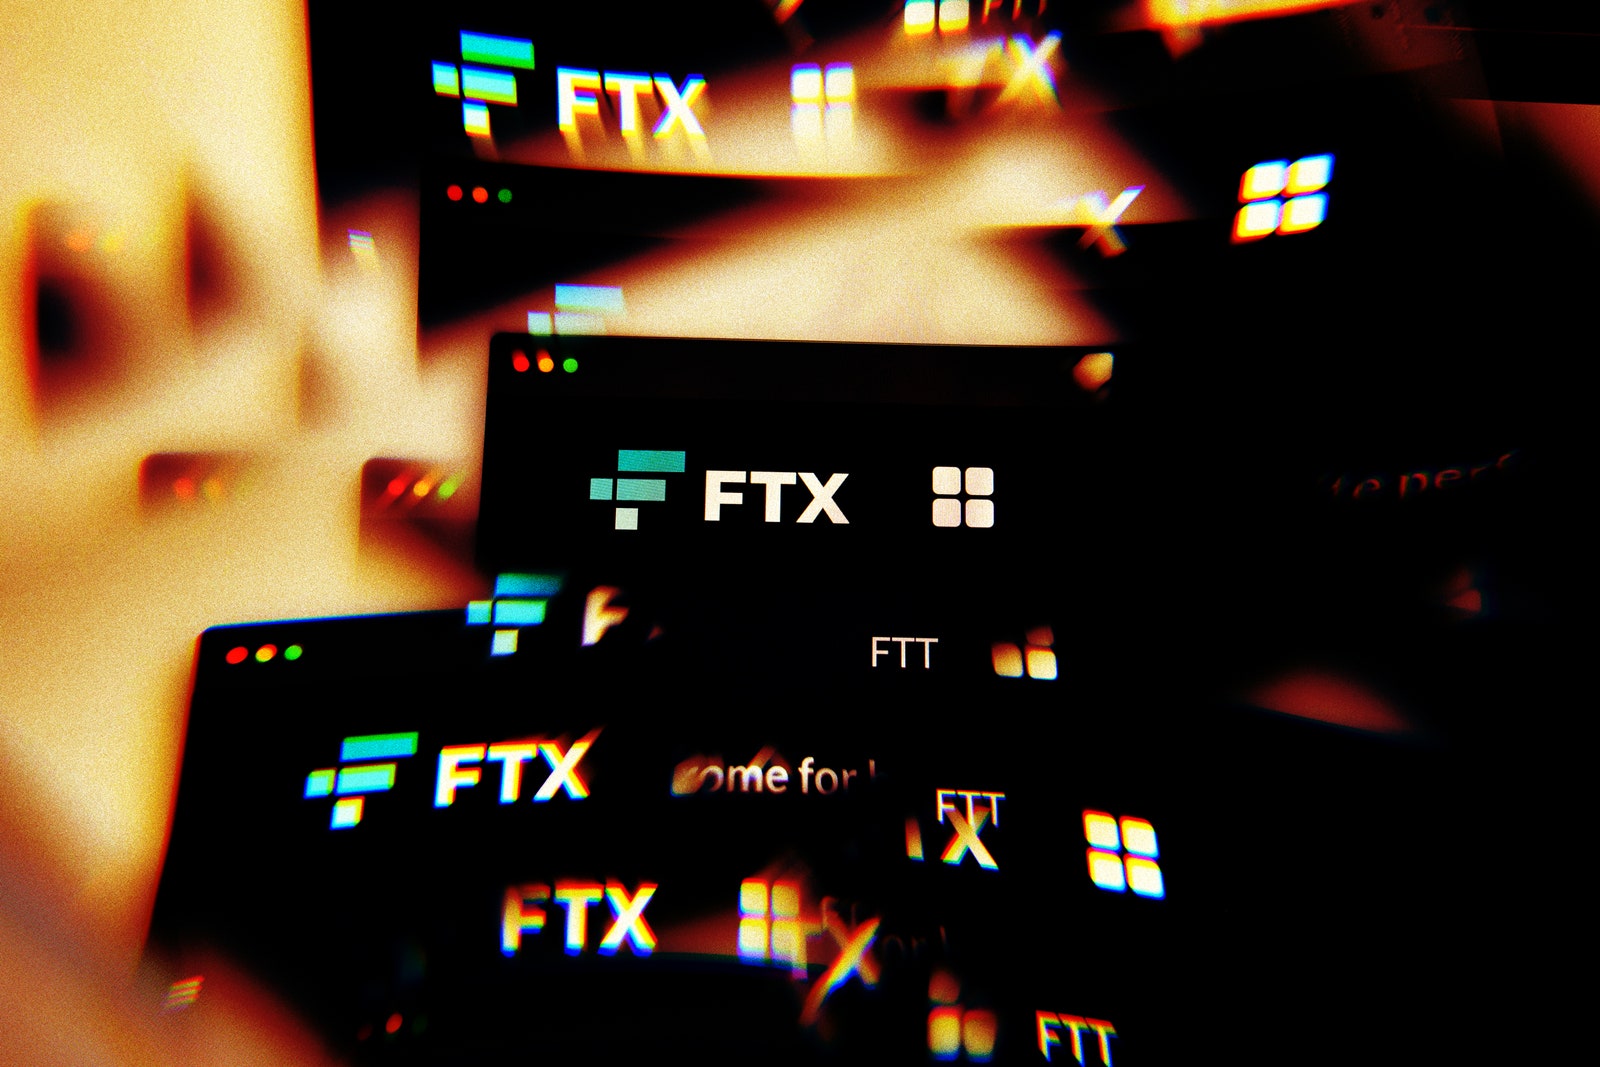 Inside FTX’s All-Night Race to Stop a $1 Billion Crypto Heist